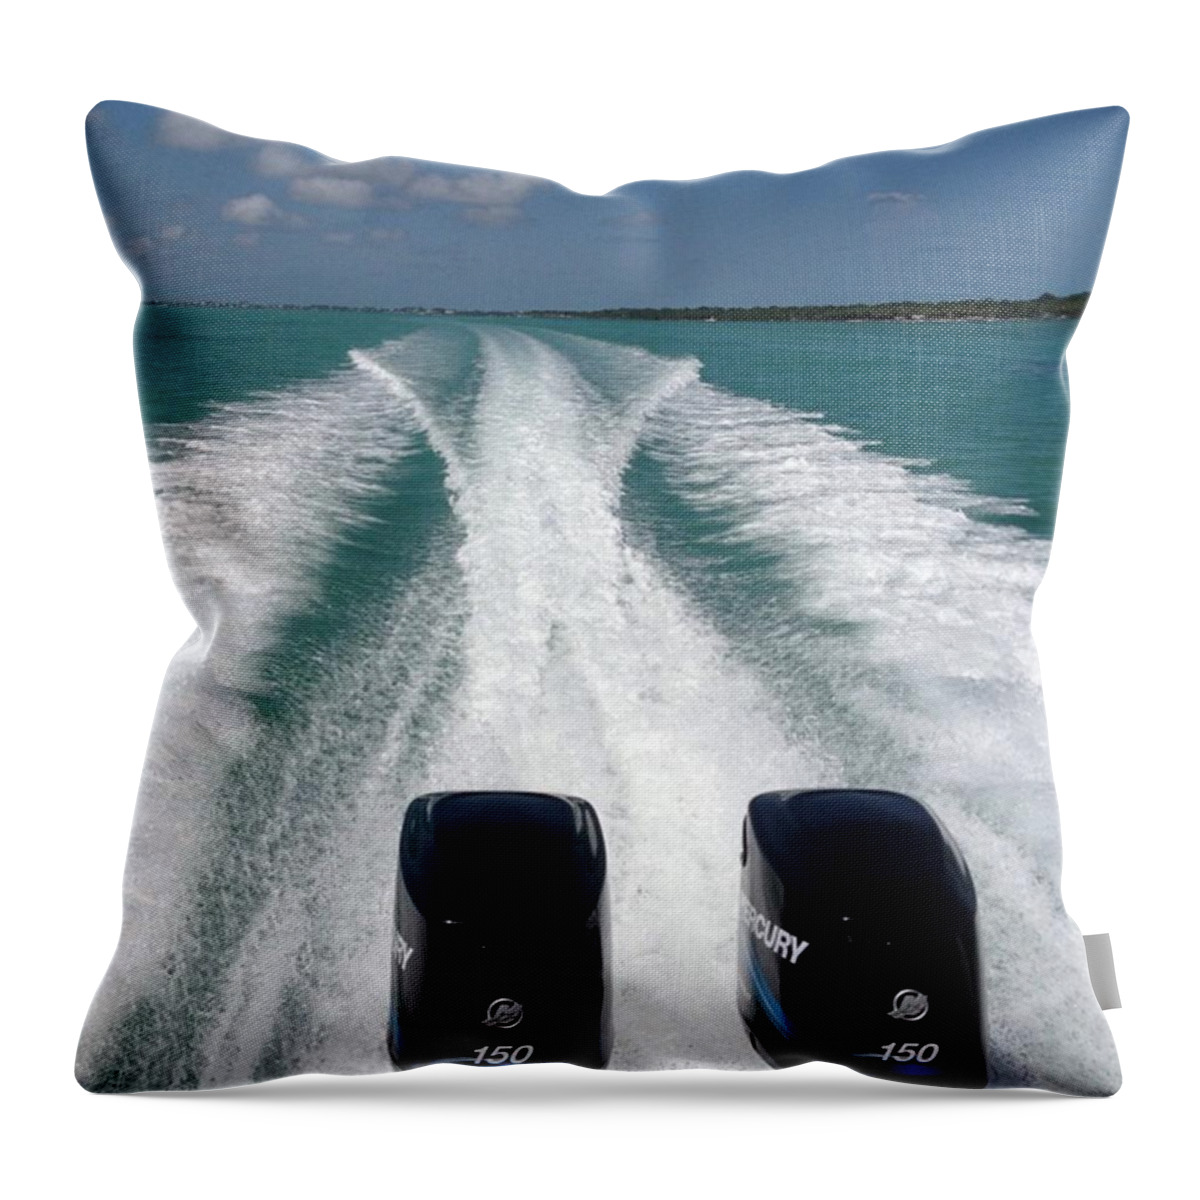  Throw Pillow featuring the photograph Boat Day by Joe Garcia